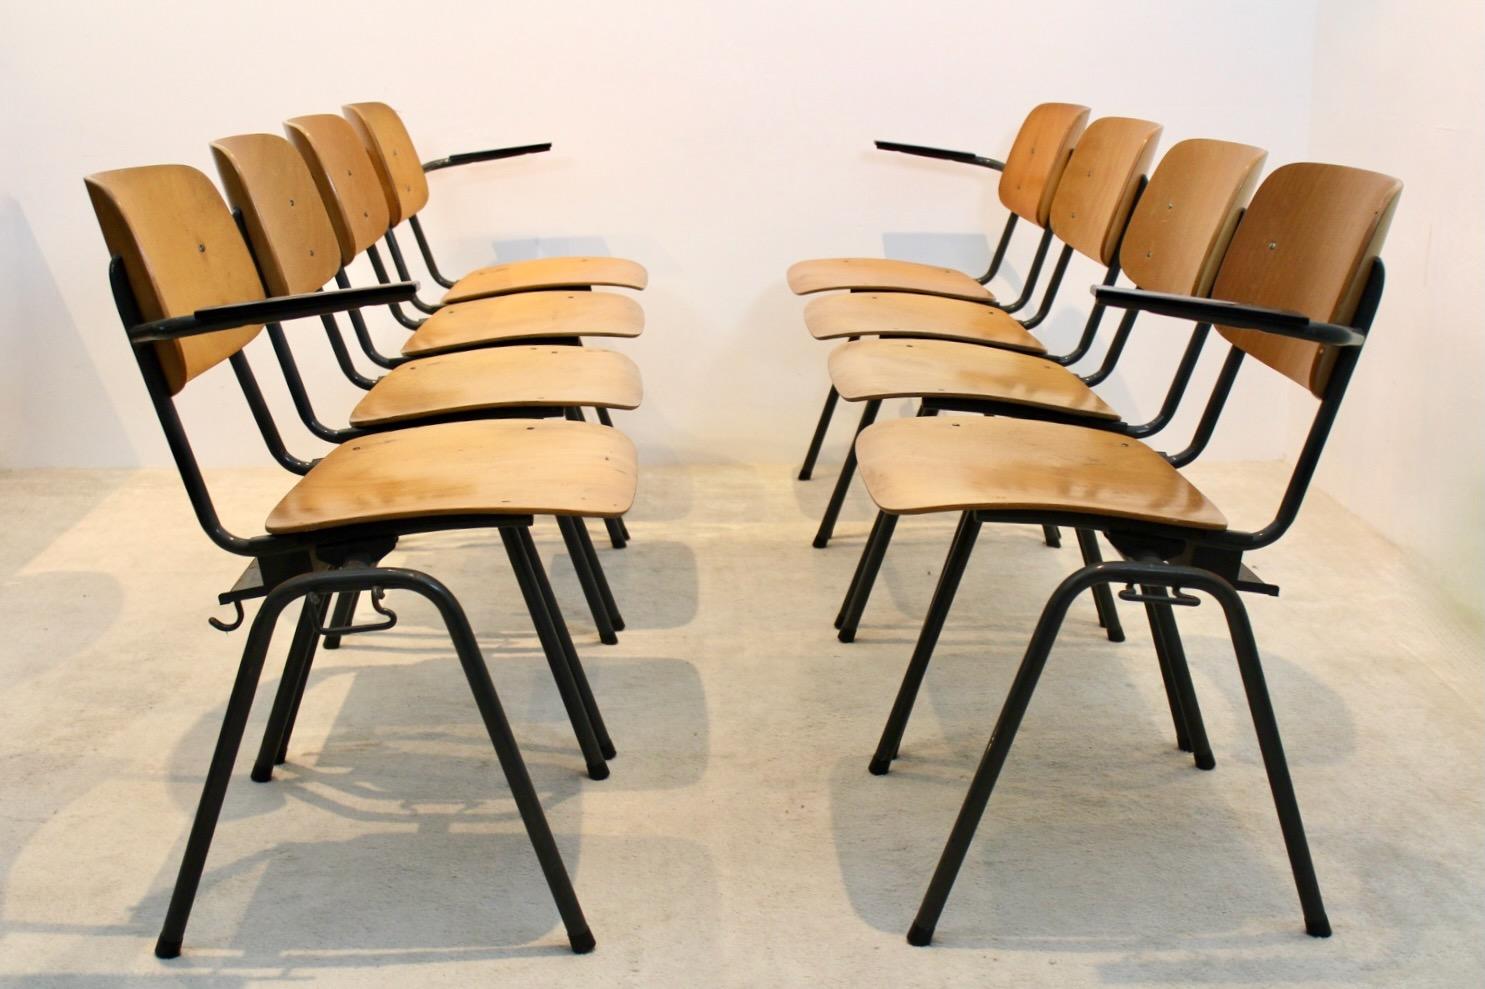 Unique Industrial Plywood Stackable School Sofa Seat by Marko Holland, 1960s For Sale 4